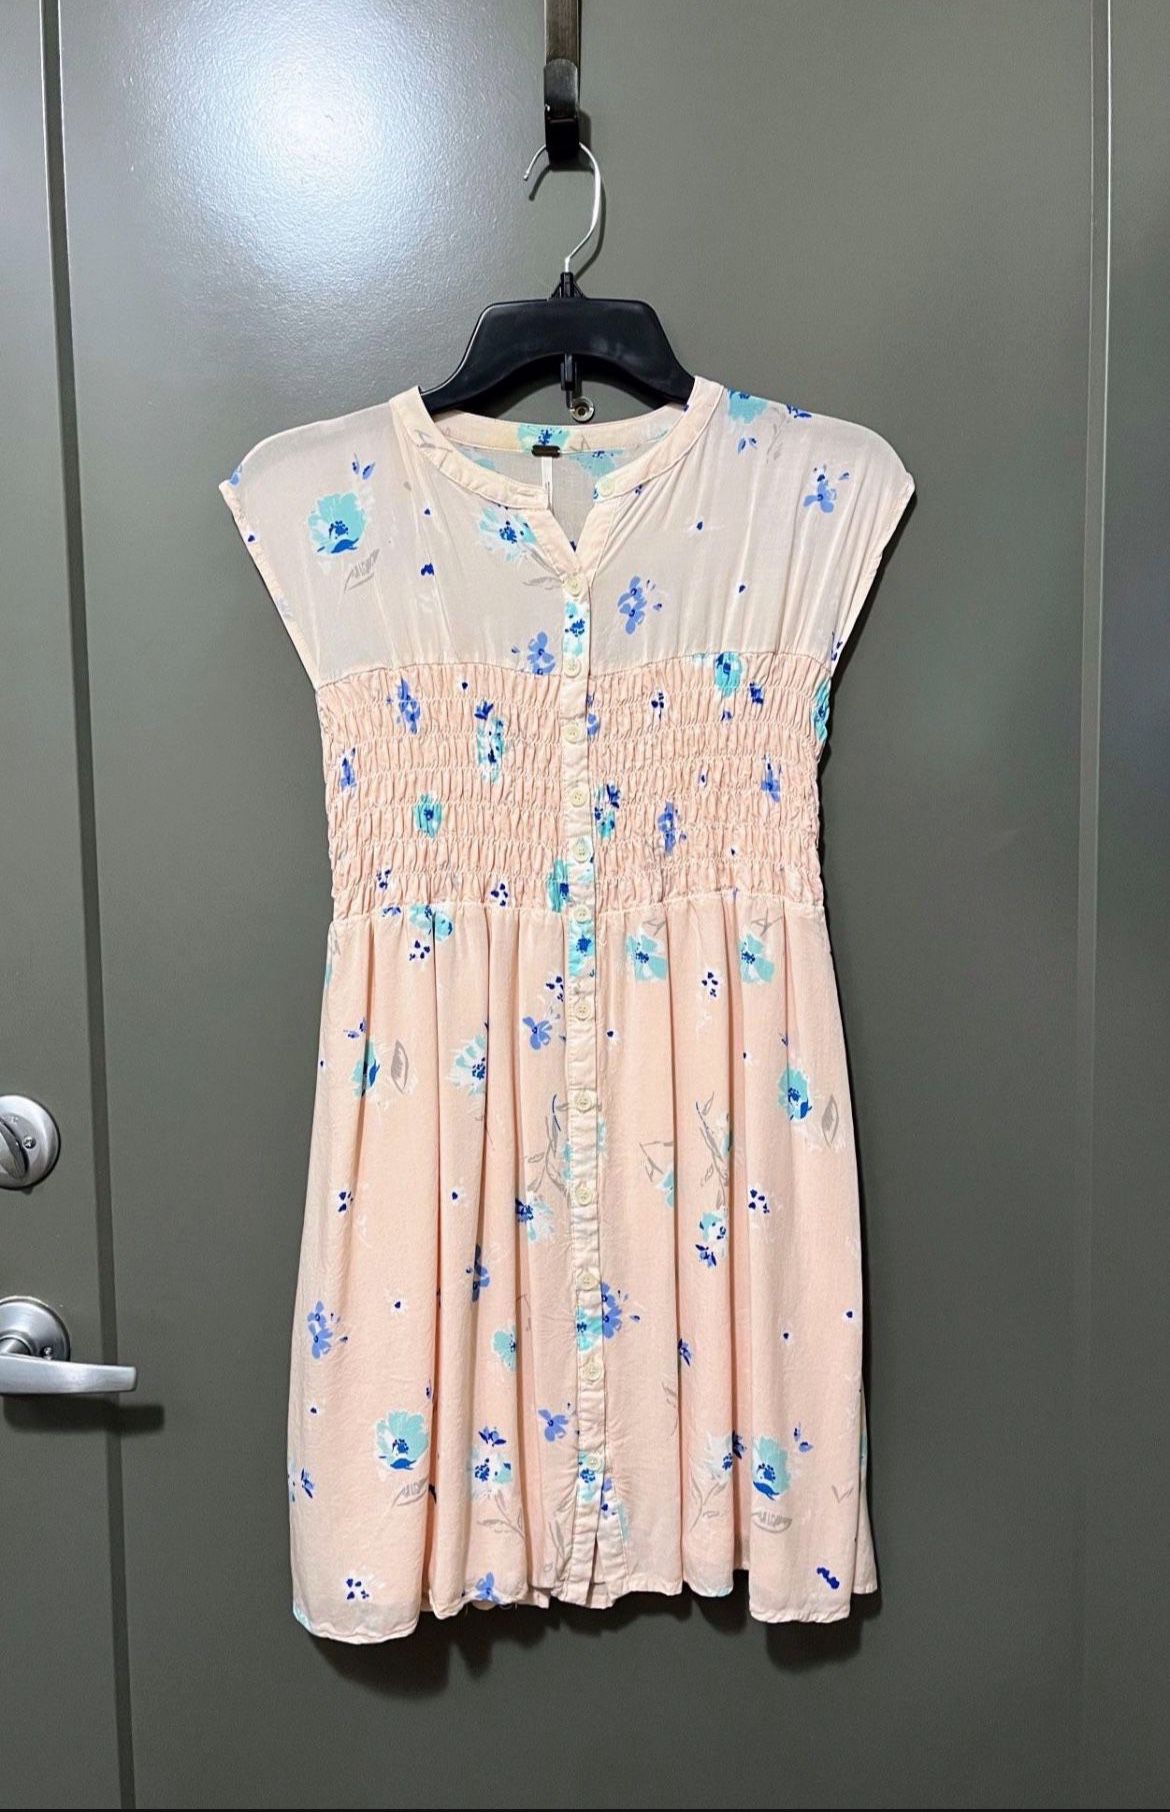 Price Just Dropped: Free People Greatest Day Smocked Mini Dress in Pink/Blue Size XS